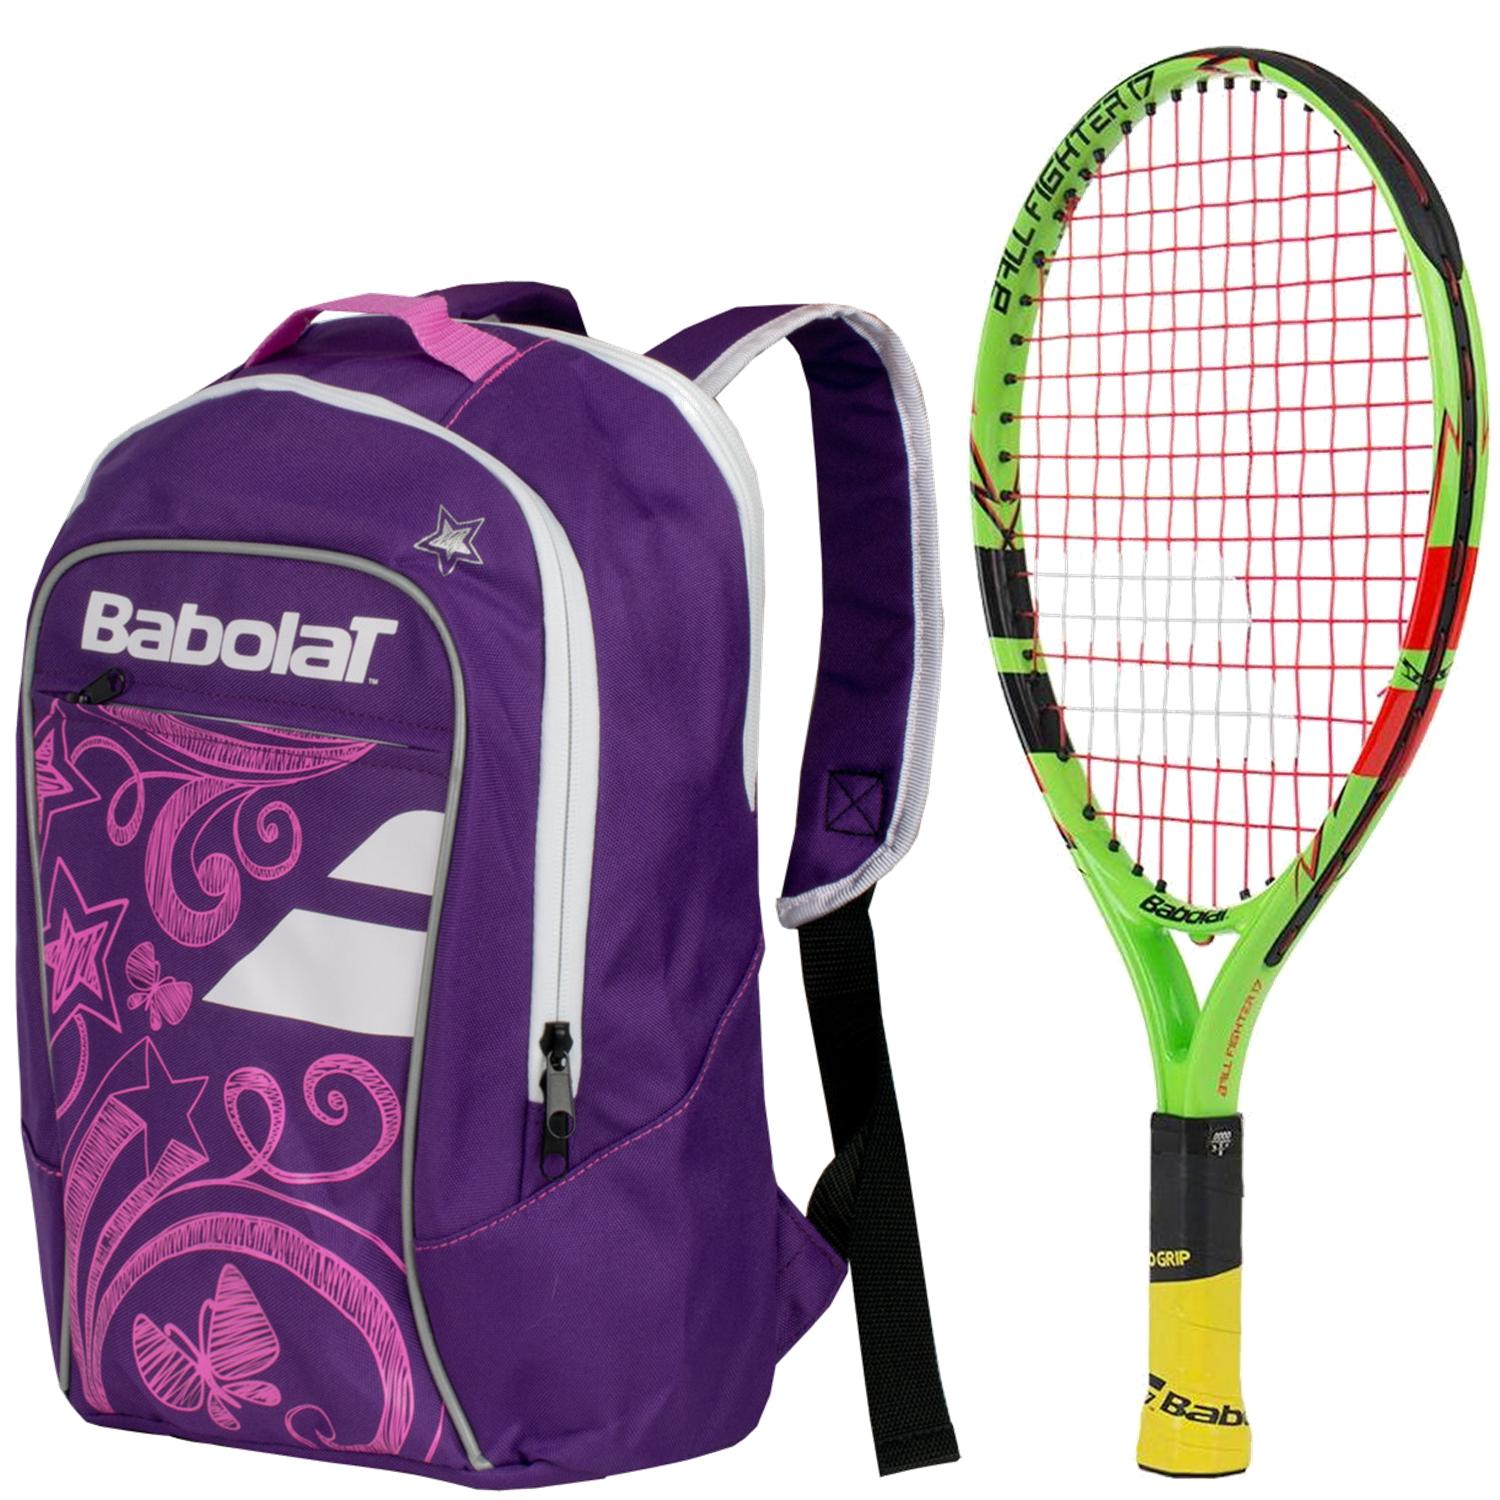 Babolat Ballfighter 17 Inch Child&amp;apos;s Tennis Racquet with a Purple Junior Tennis Backpack